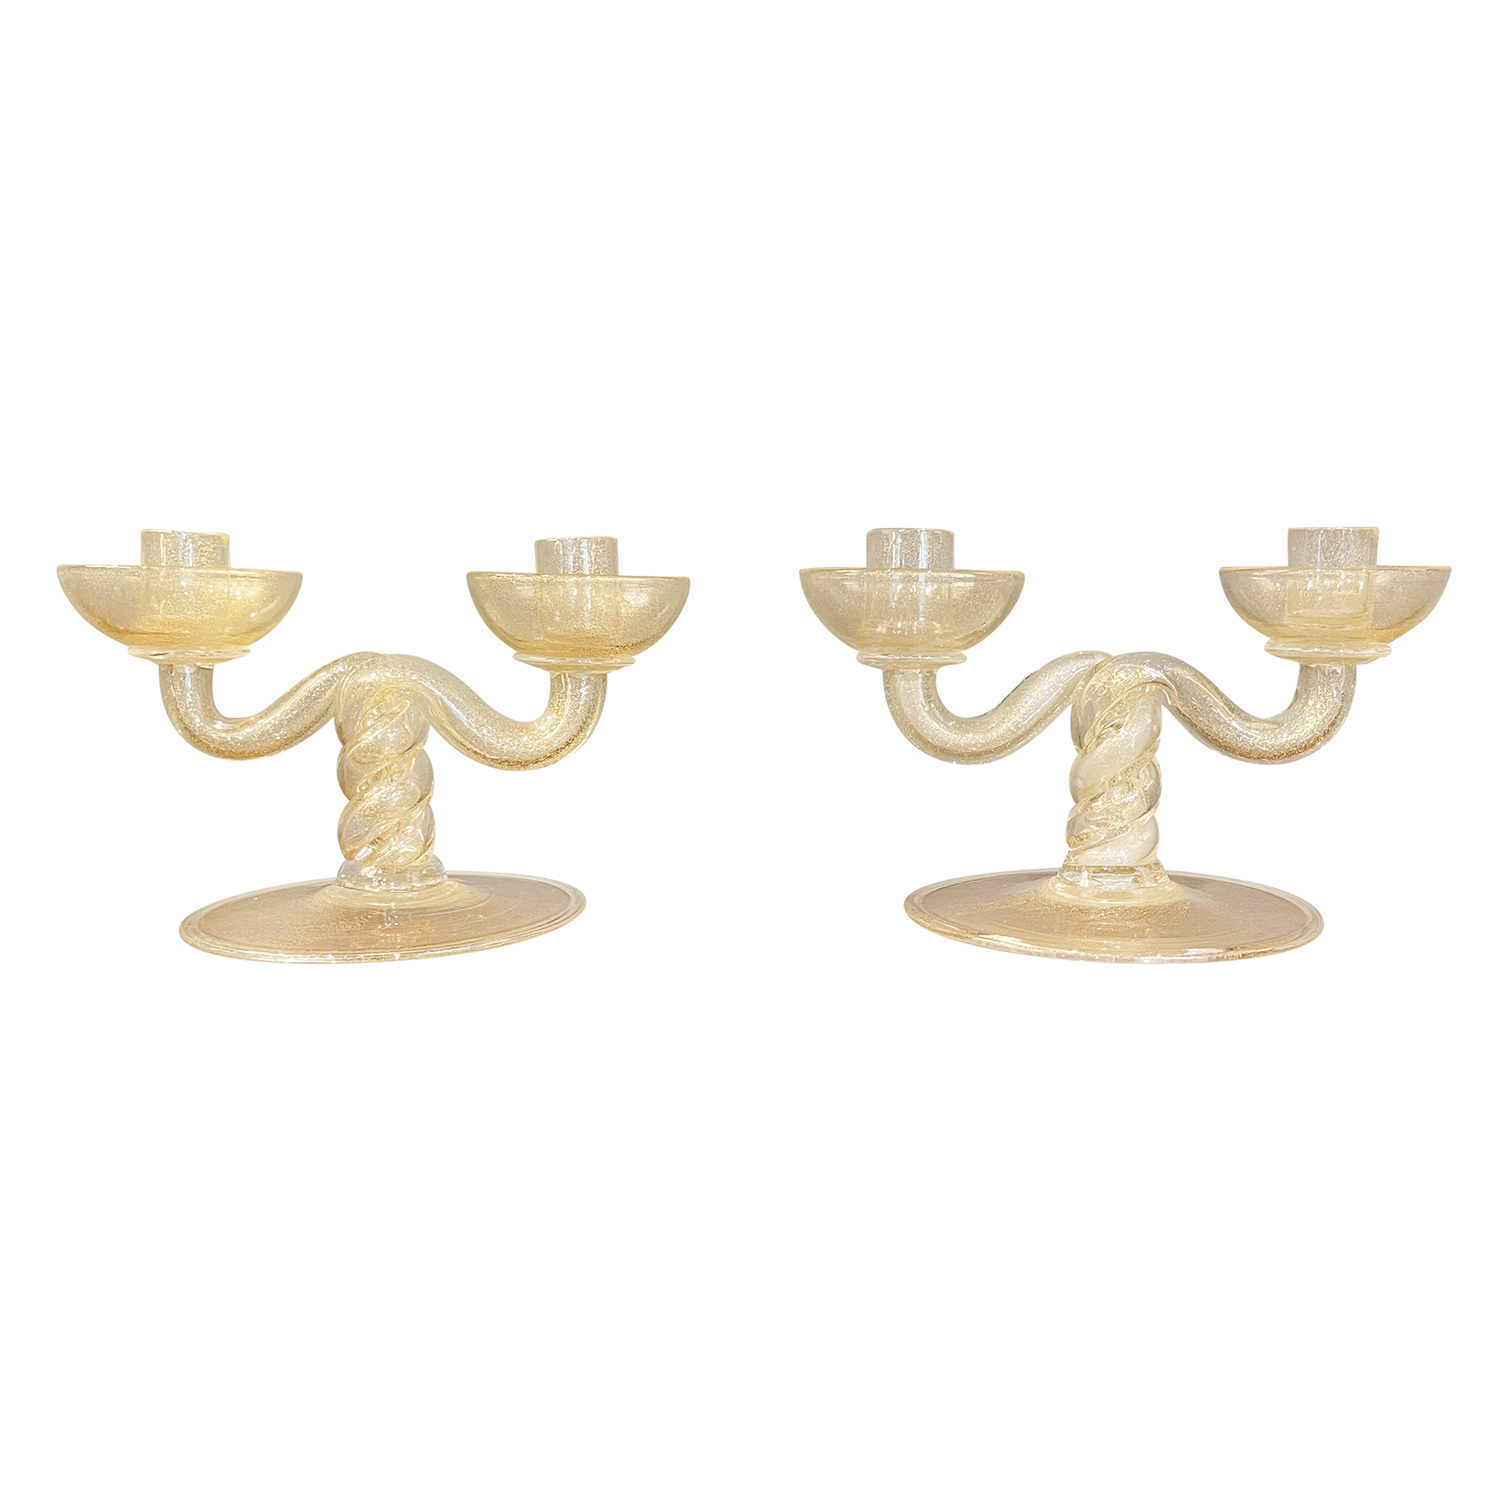 Pair of 1940s Italian Murano Glass Candleholders by Barovier & Toso